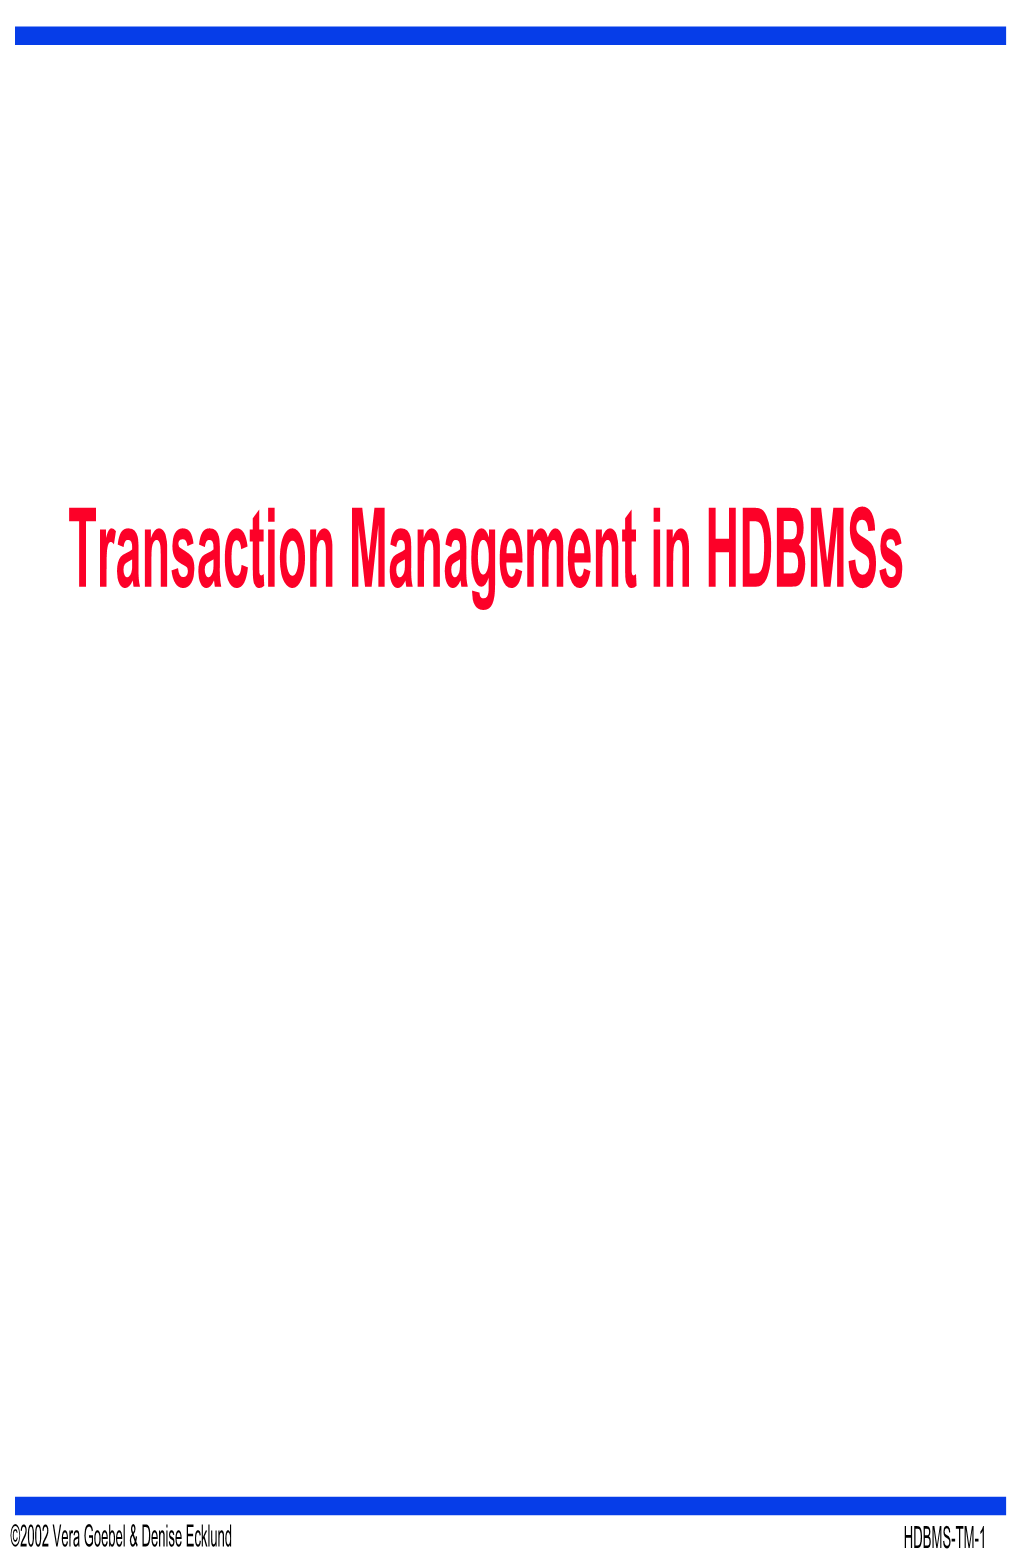 Transaction Management in Hdbmss